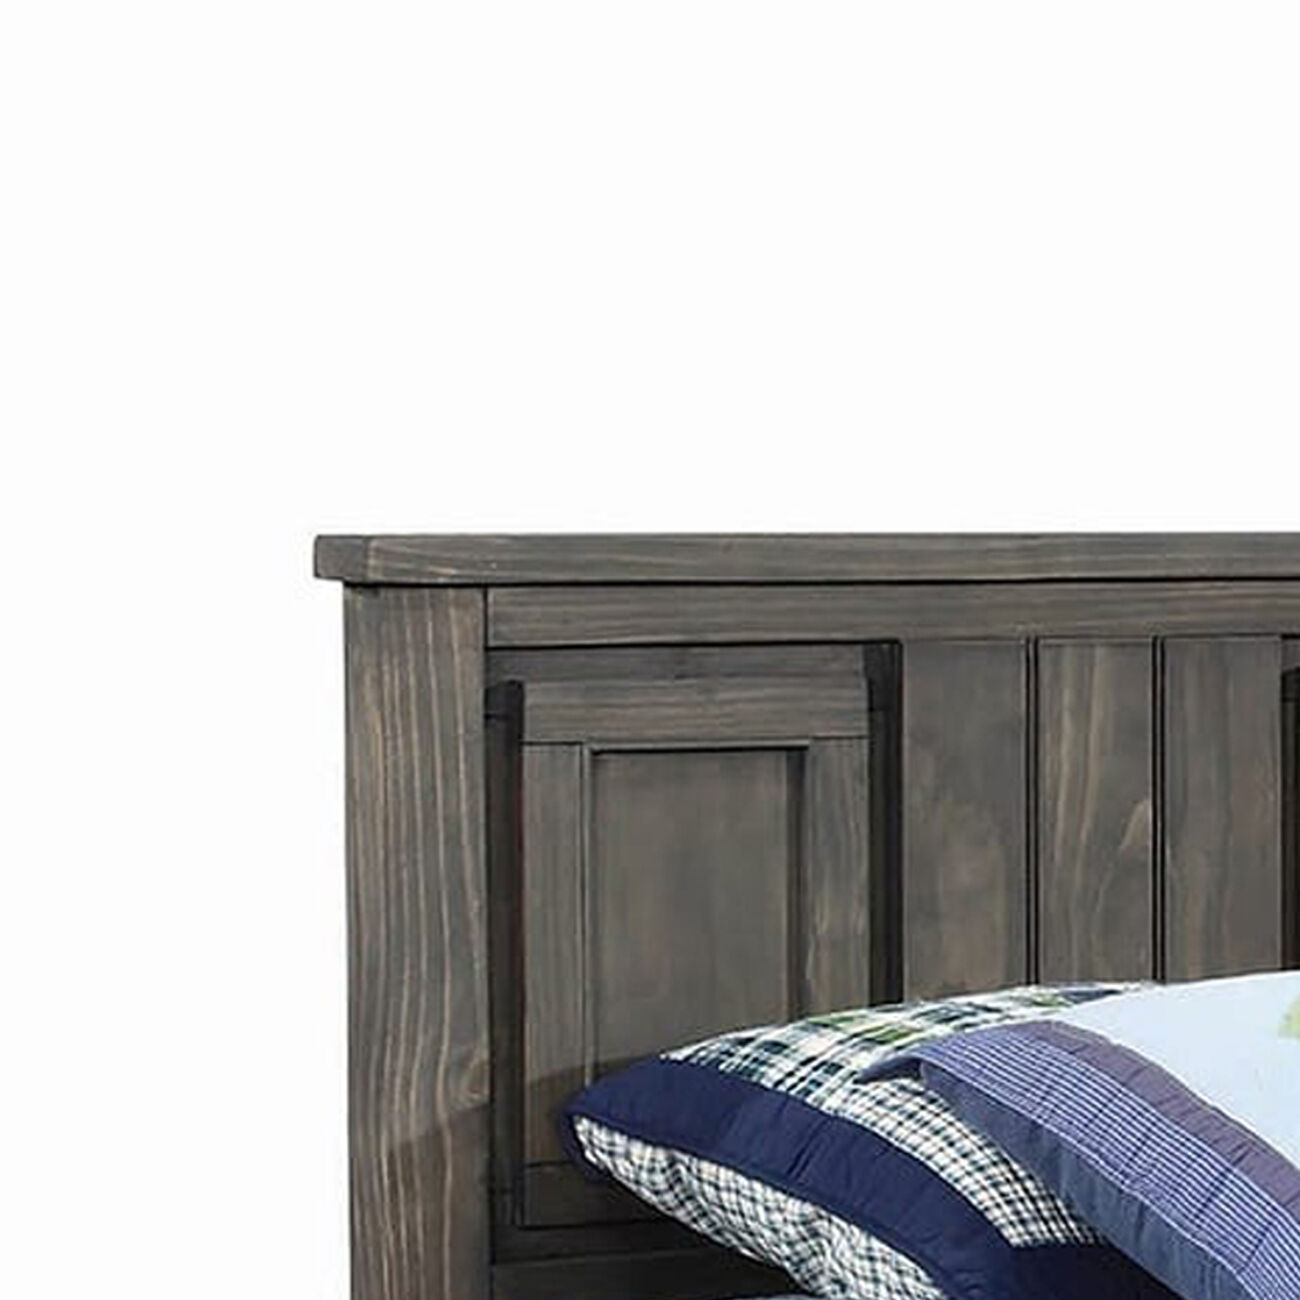 Transitional Wooden Panel Design Twin Size Headboard, Gray